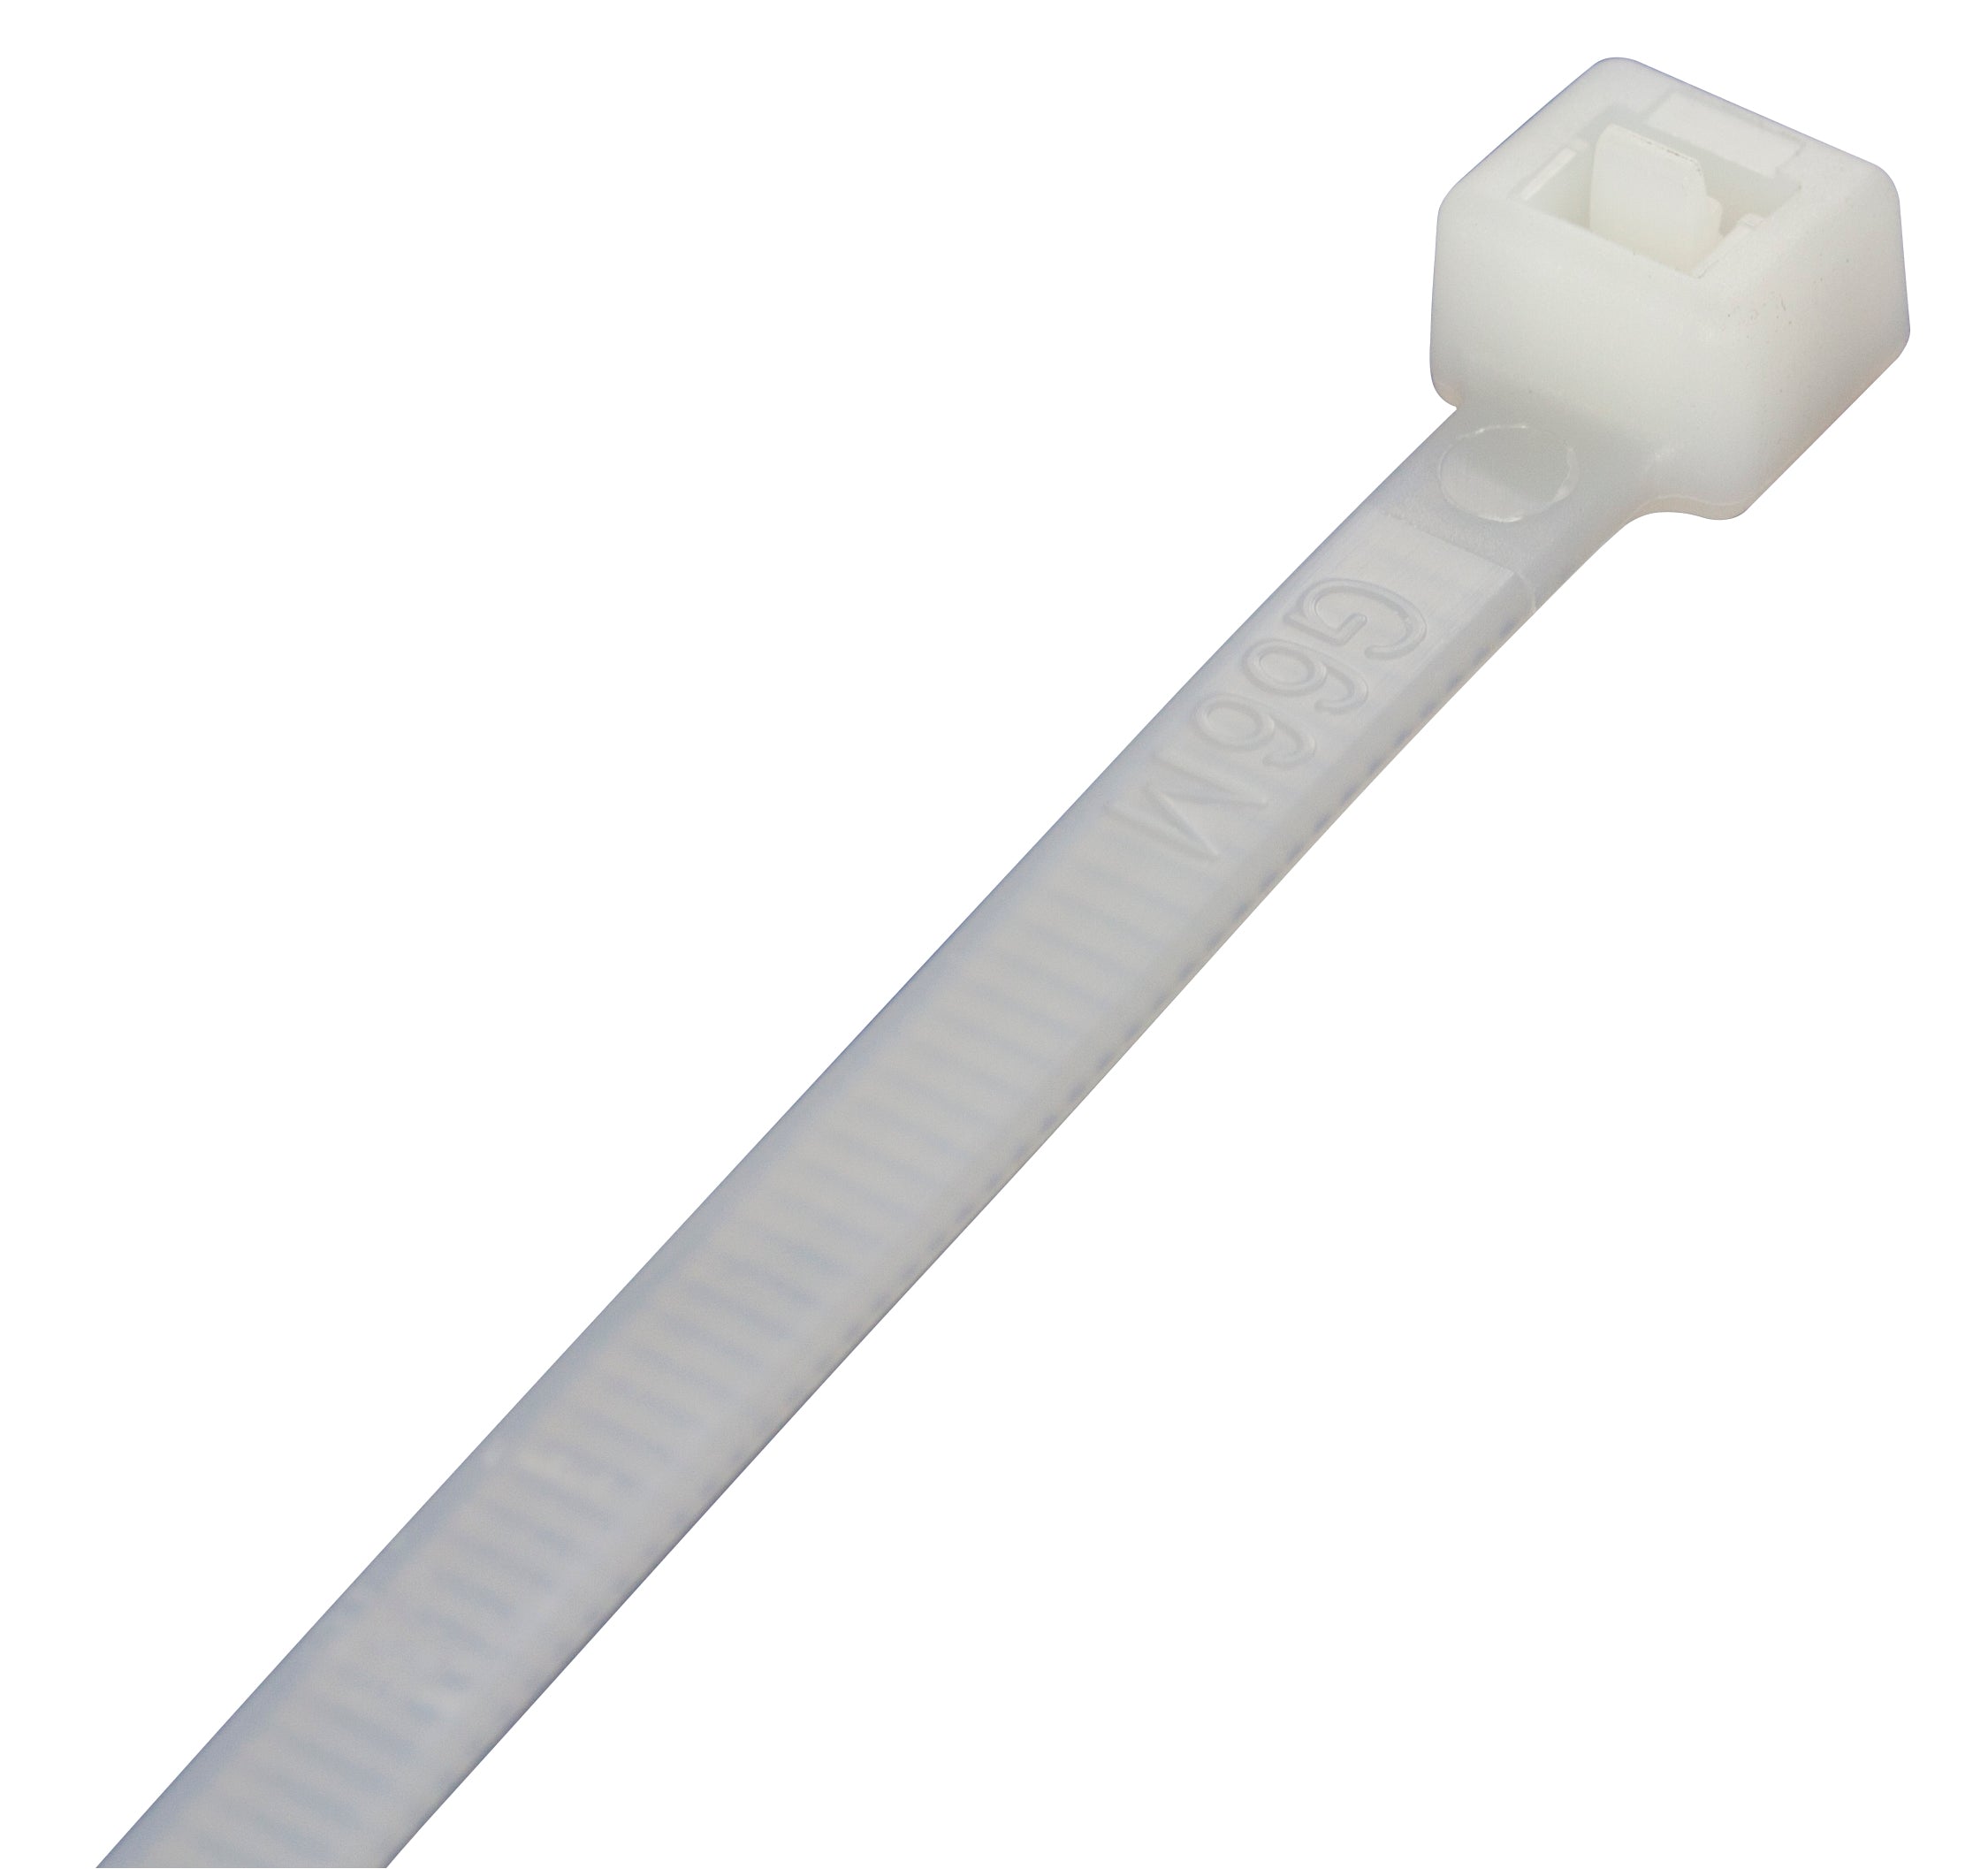 Premium Natural Cable Ties 140mm x 3.6mm - Pack of 100